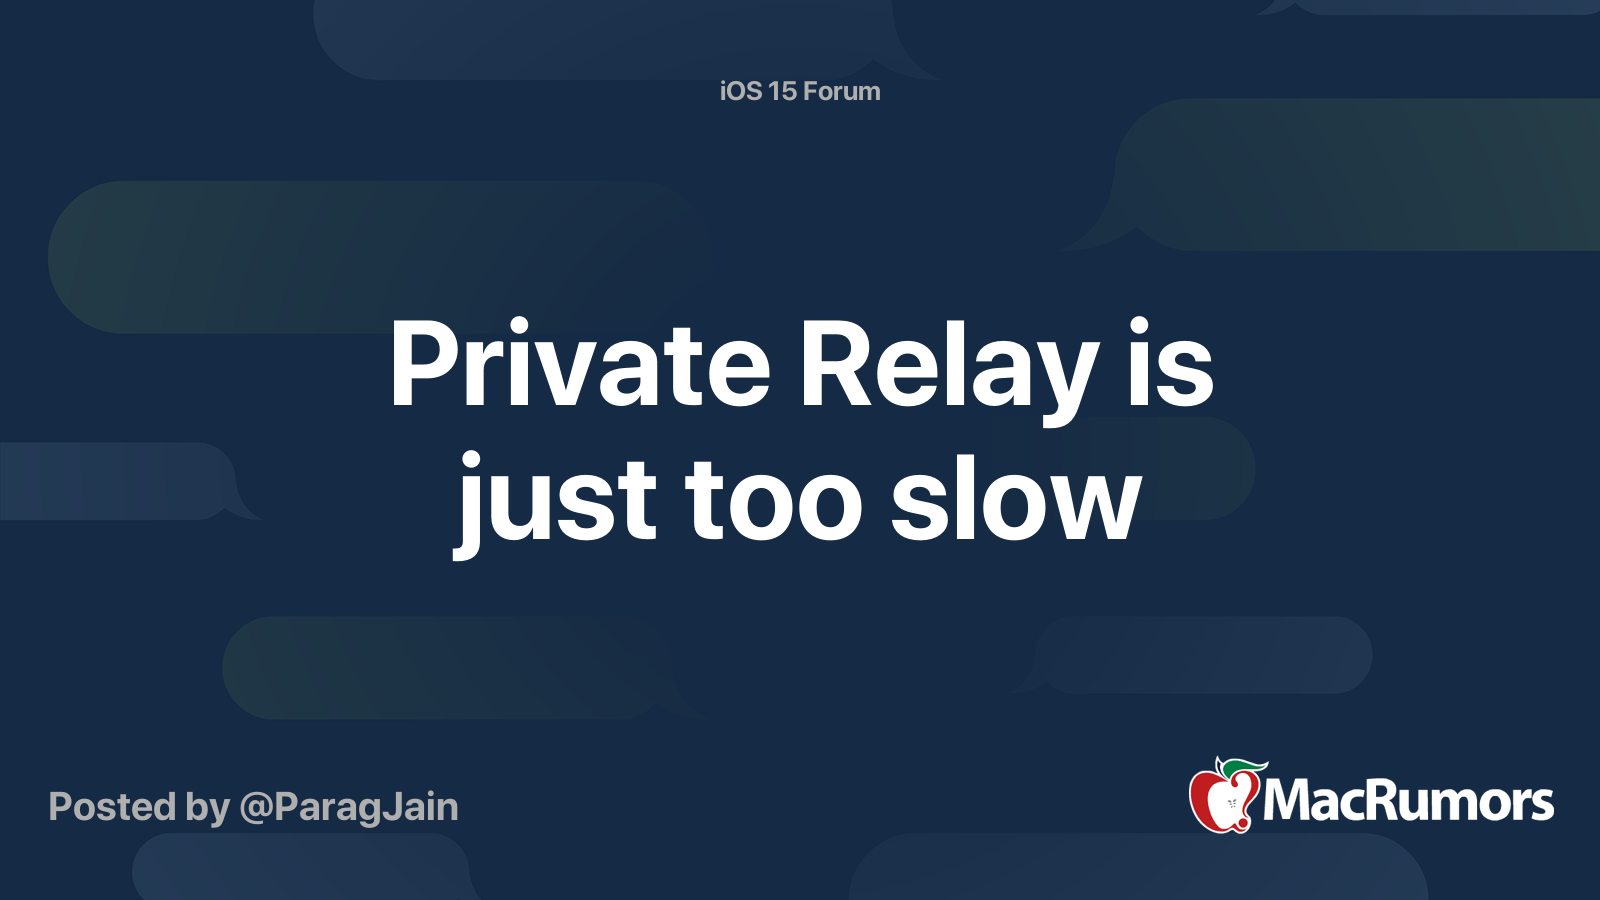 Why is Apple Private Relay so slow?